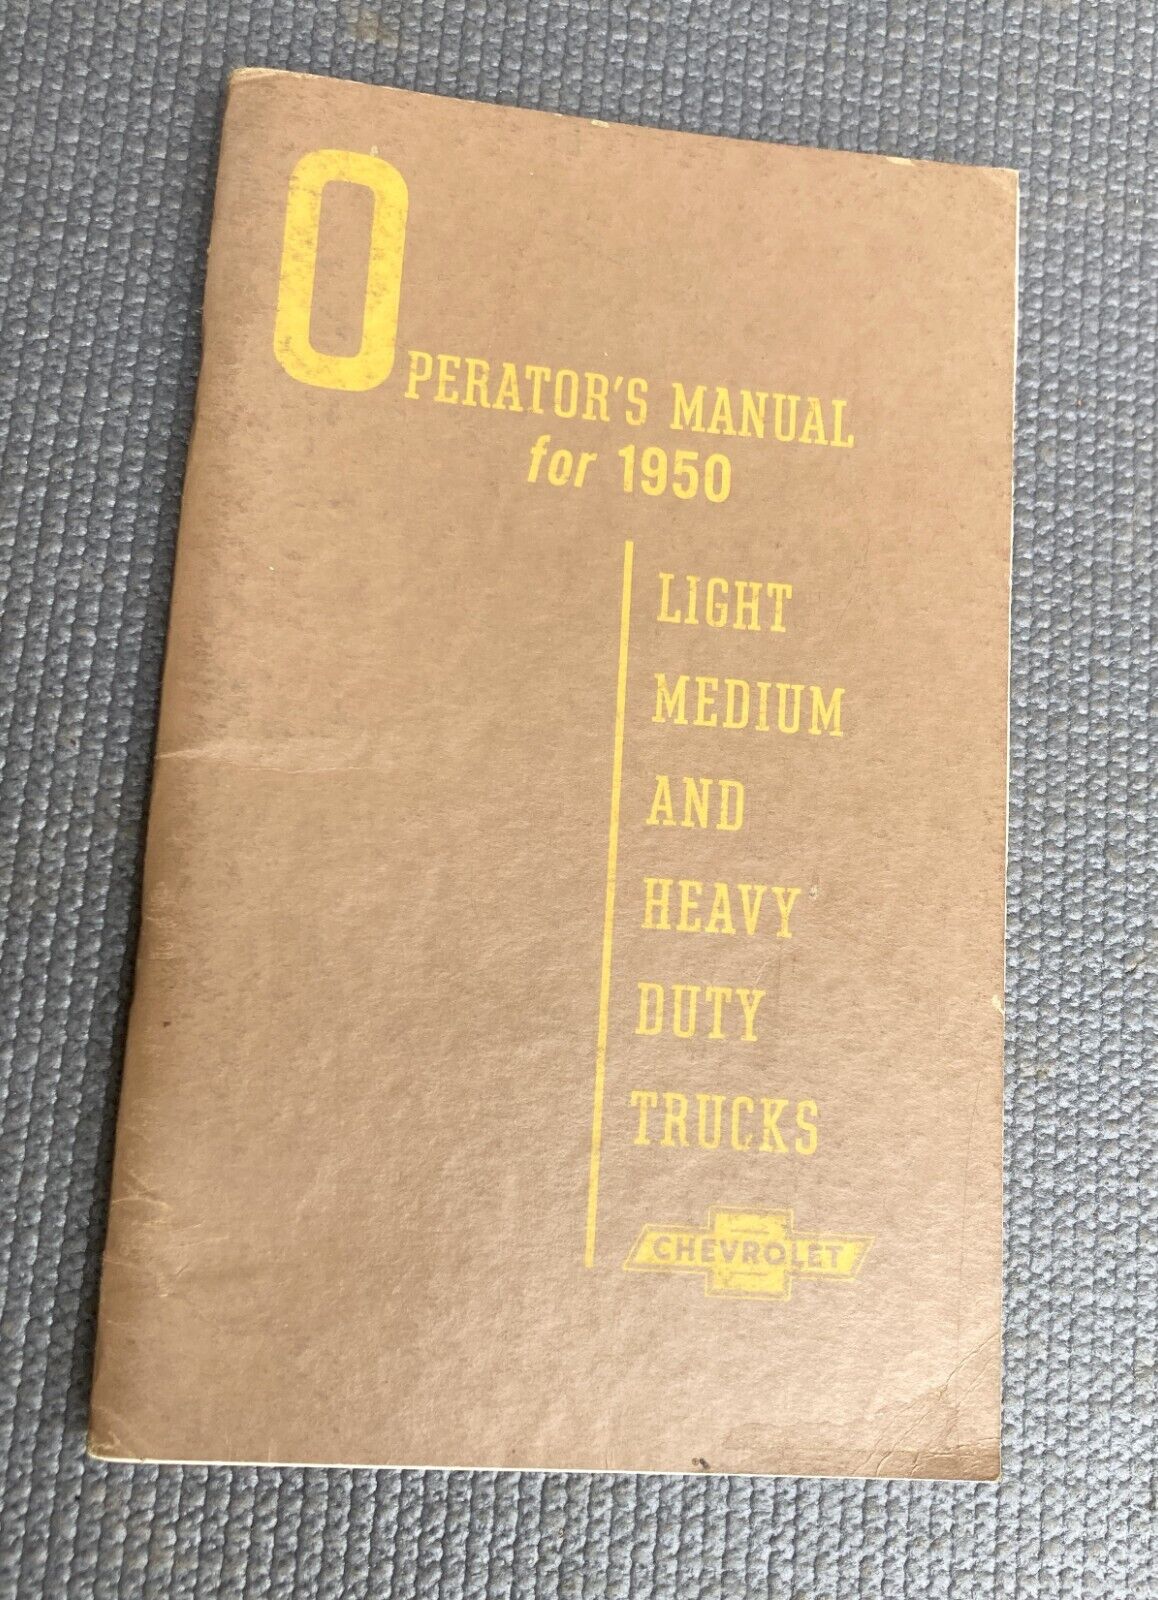 Vintage Original -1950 Chevrolet Truck Operator Owners Manual- Chevy 1950 Models